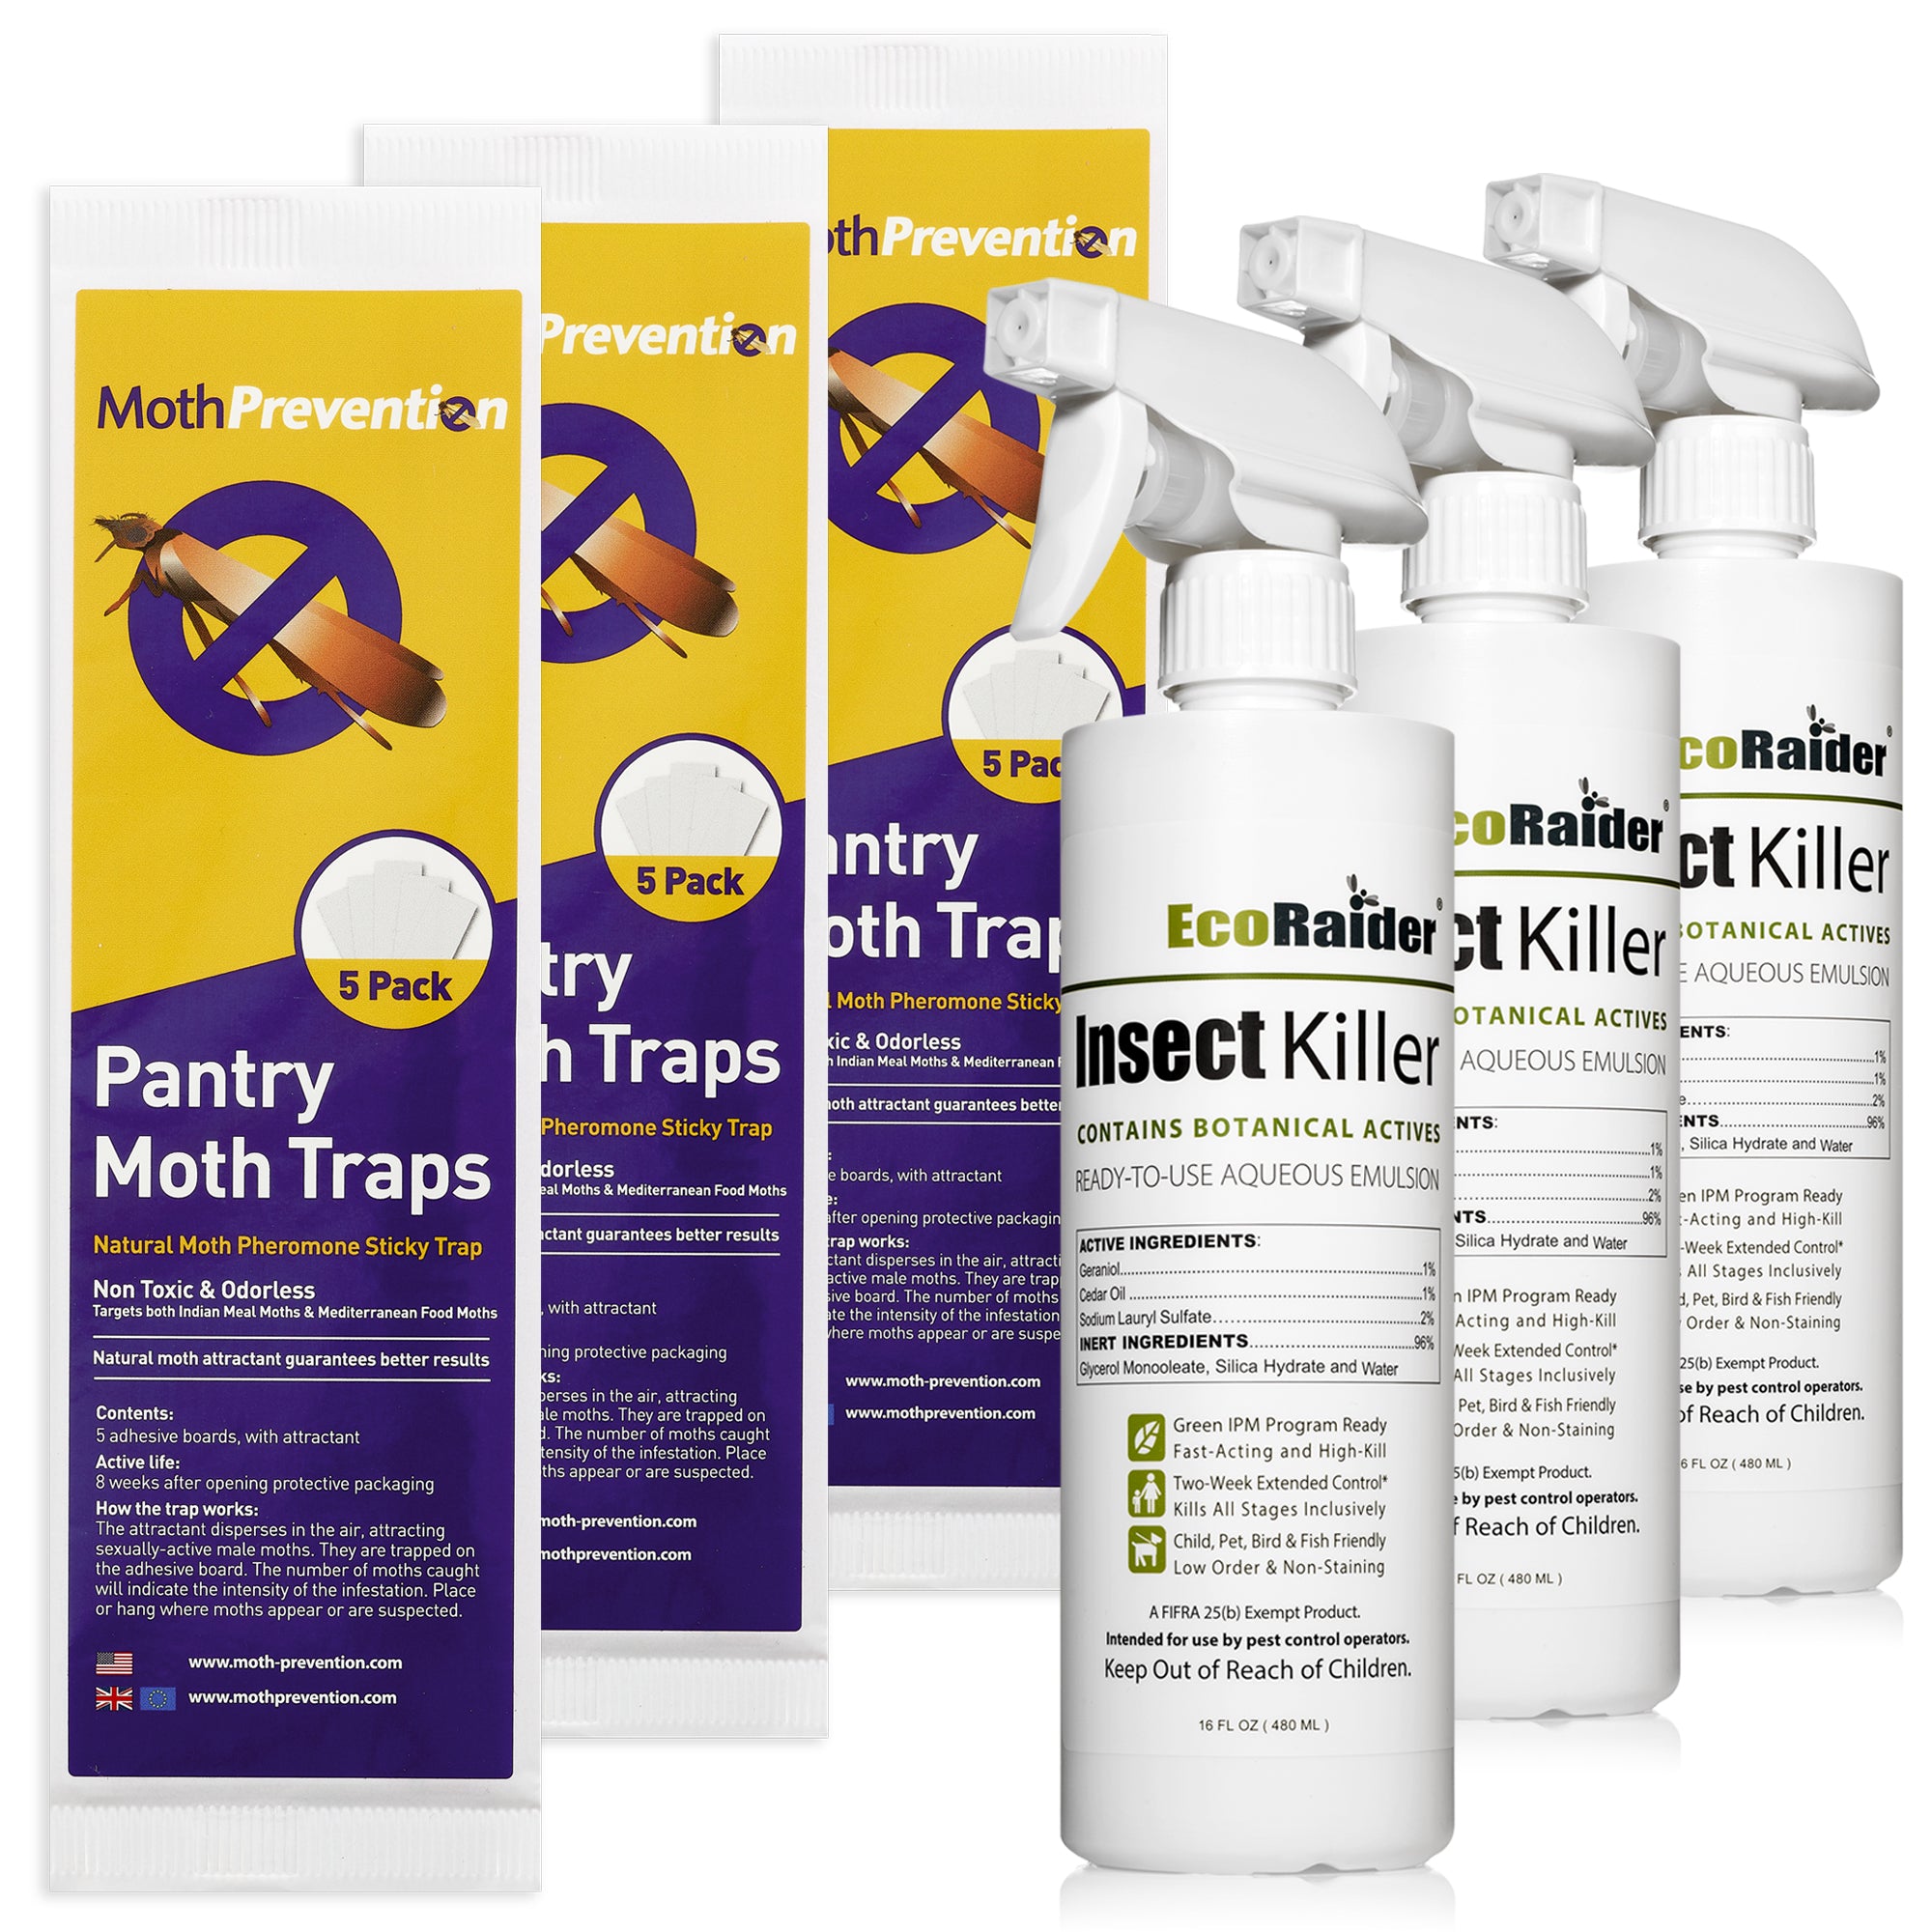 https://cdn.shopify.com/s/files/1/0221/7618/collections/Collection-Pantry-Moth-Killer-Products.jpg?v=1520943247